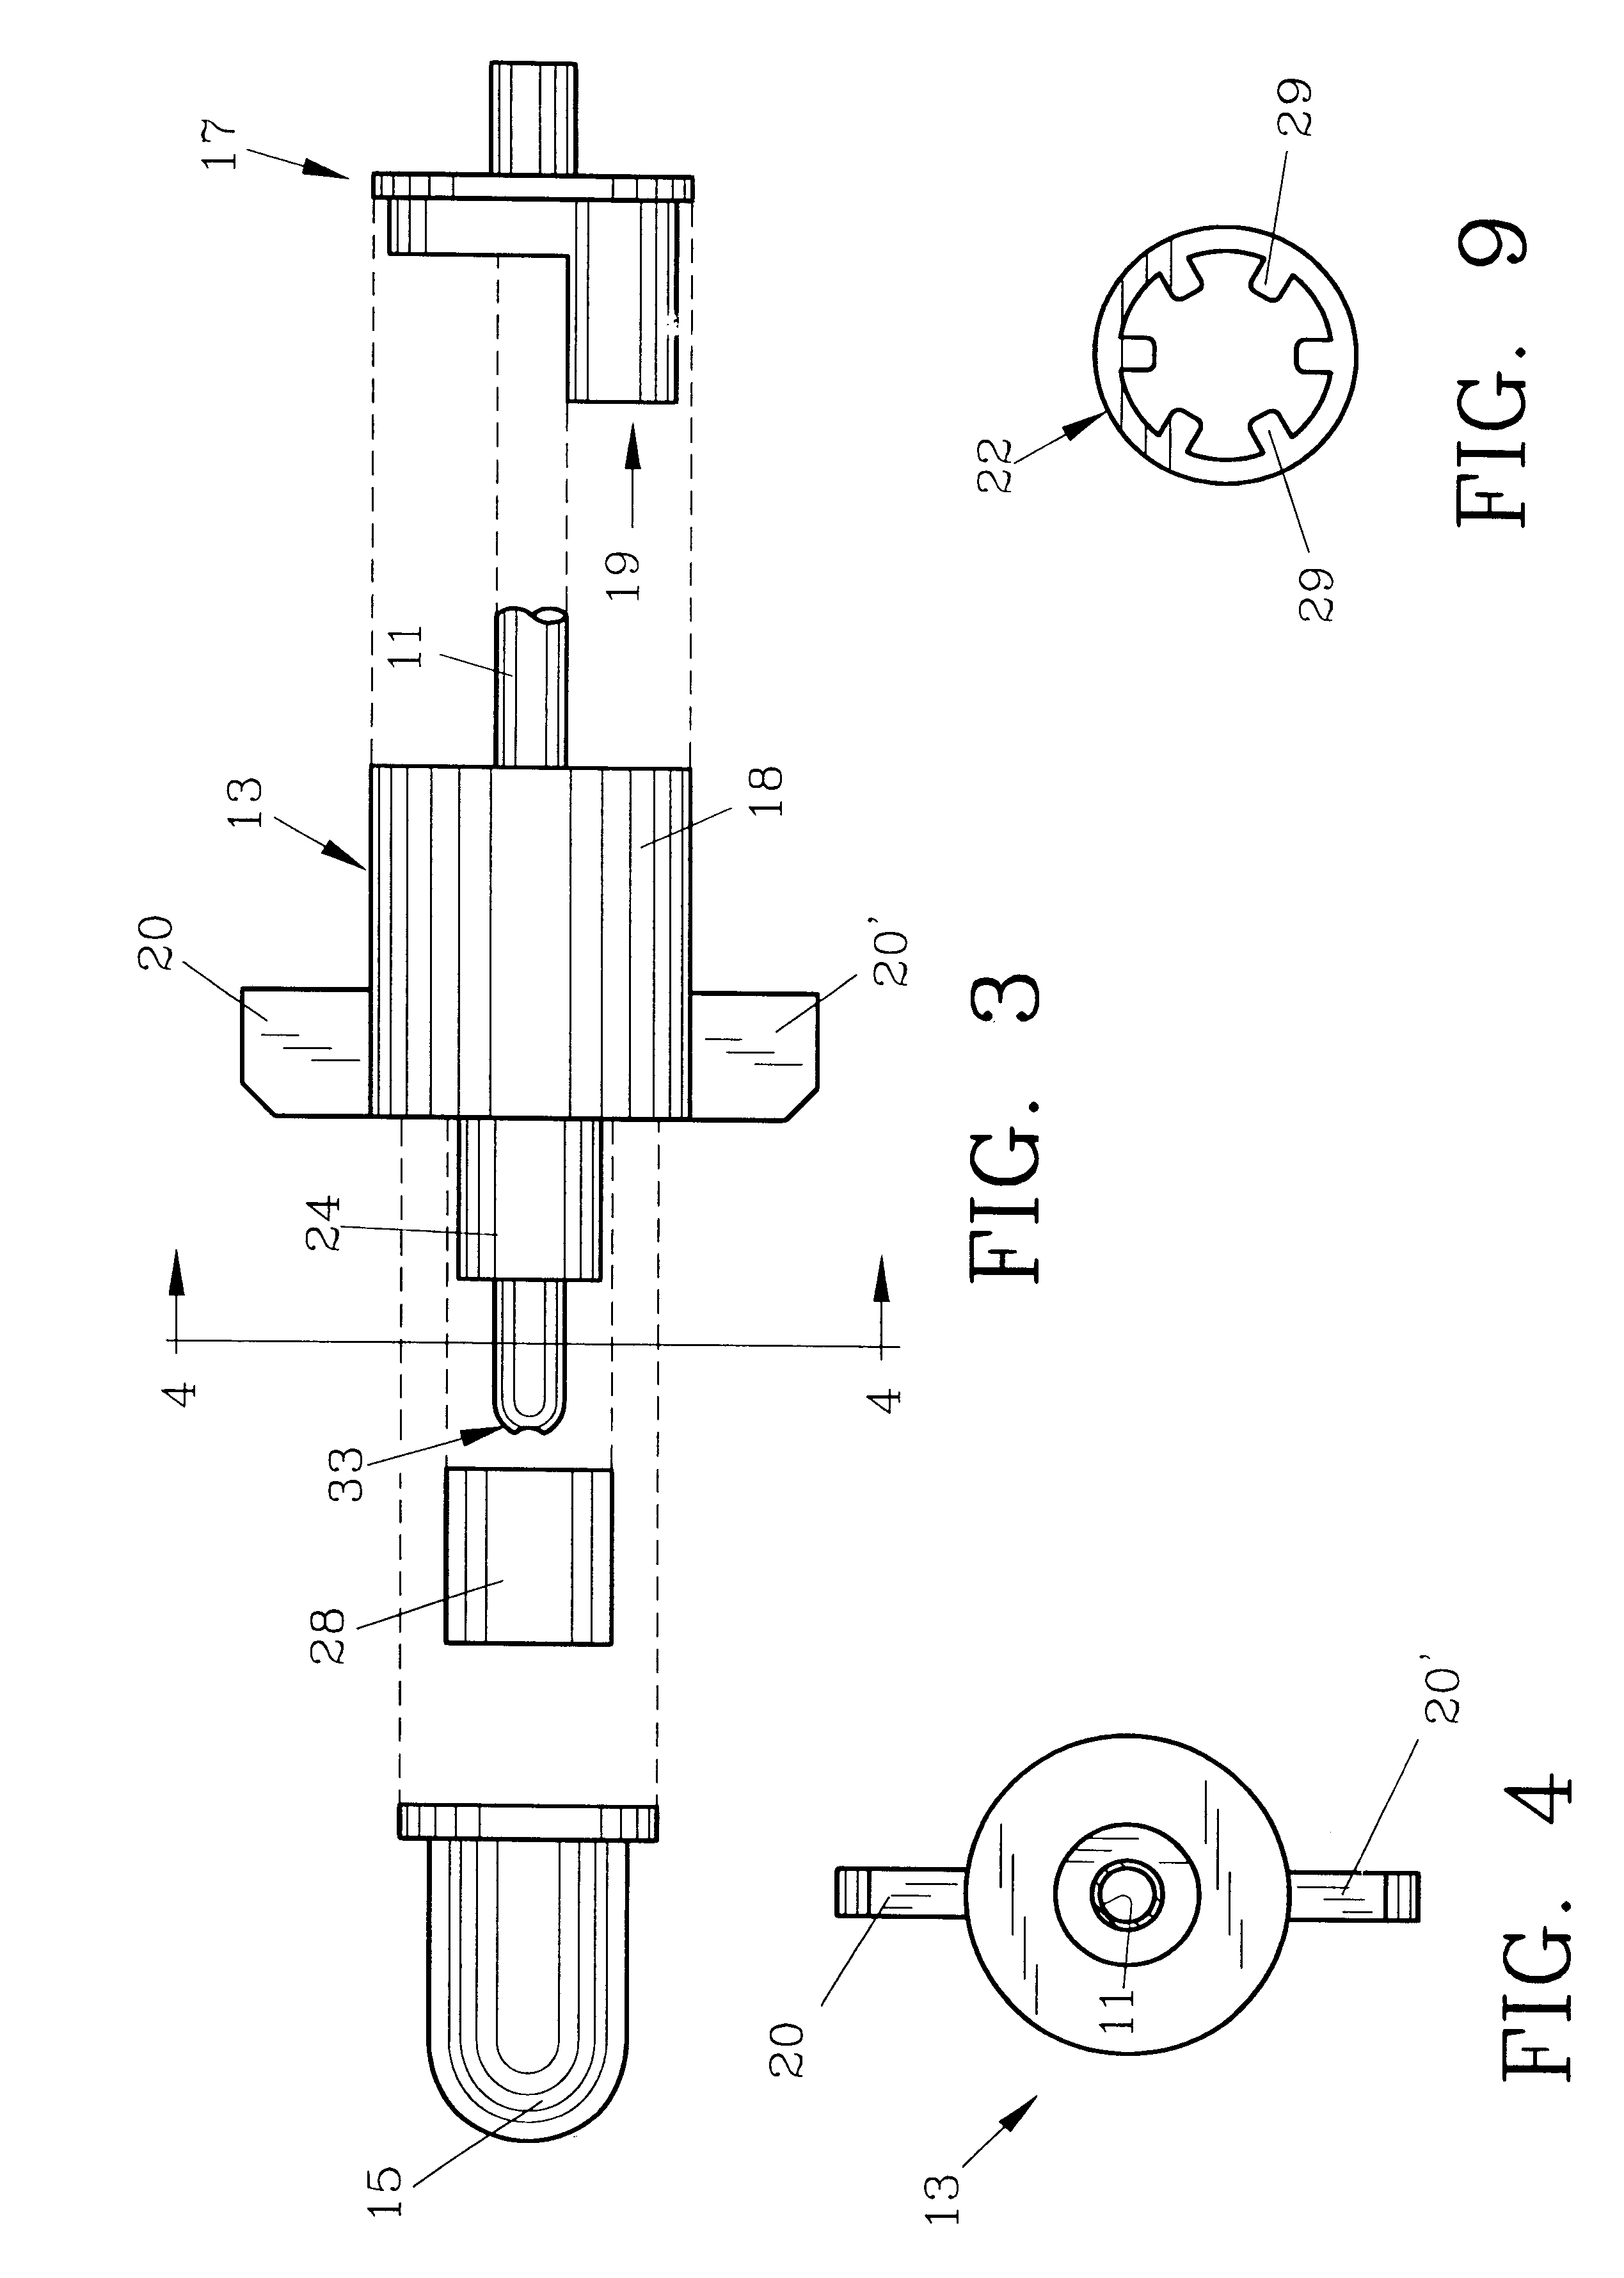 Catheter movement control device and method